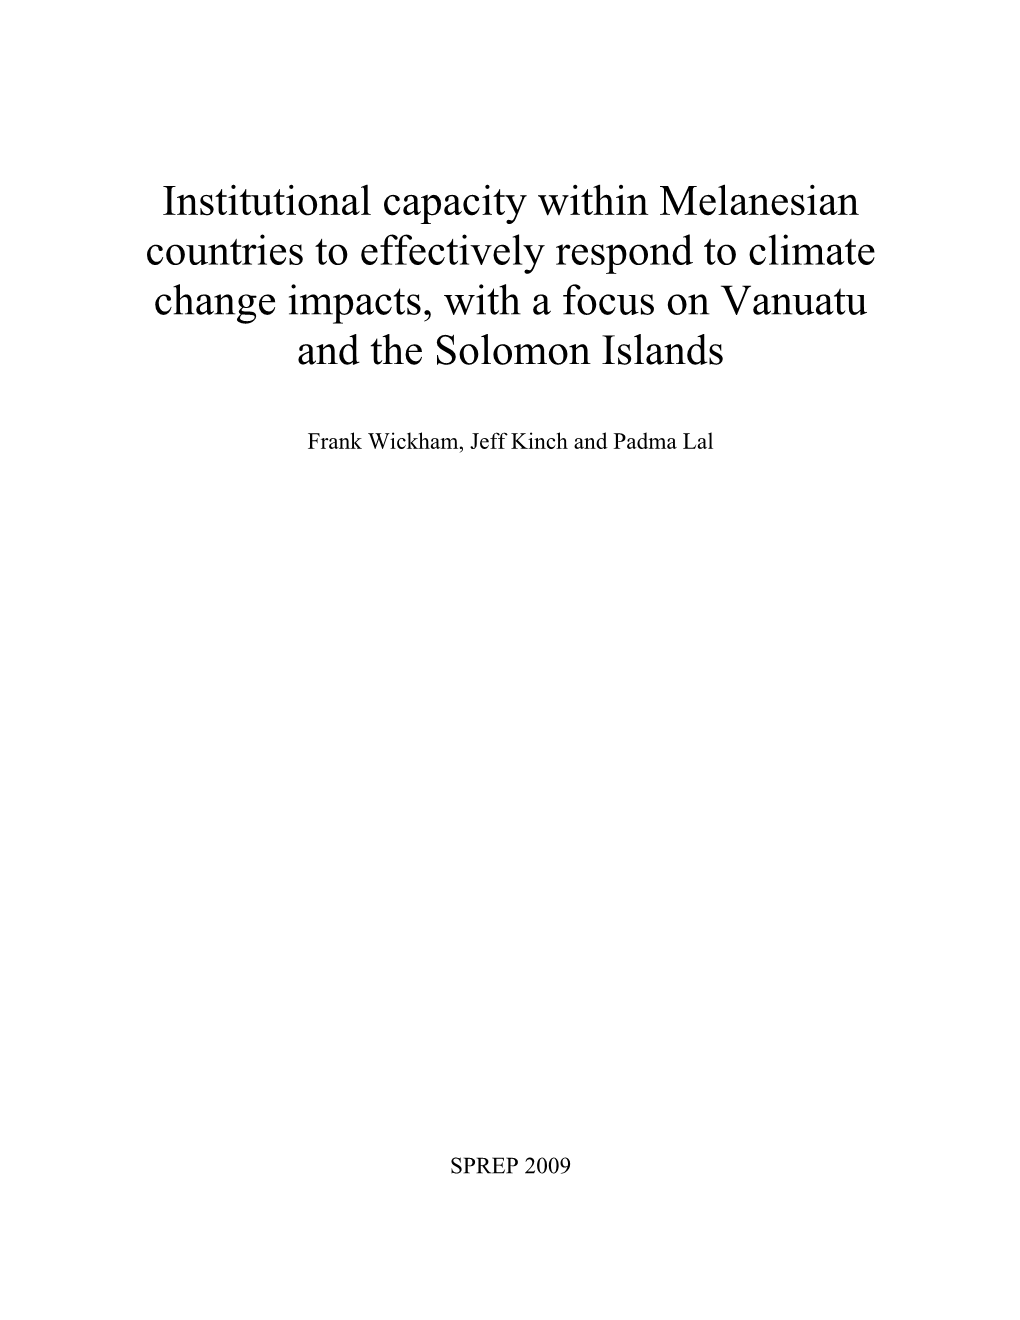 Institutional Capacity Within Melanesian Countries to Effectively Respond to Climate Change Impacts, with a Focus on Vanuatu and the Solomon Islands